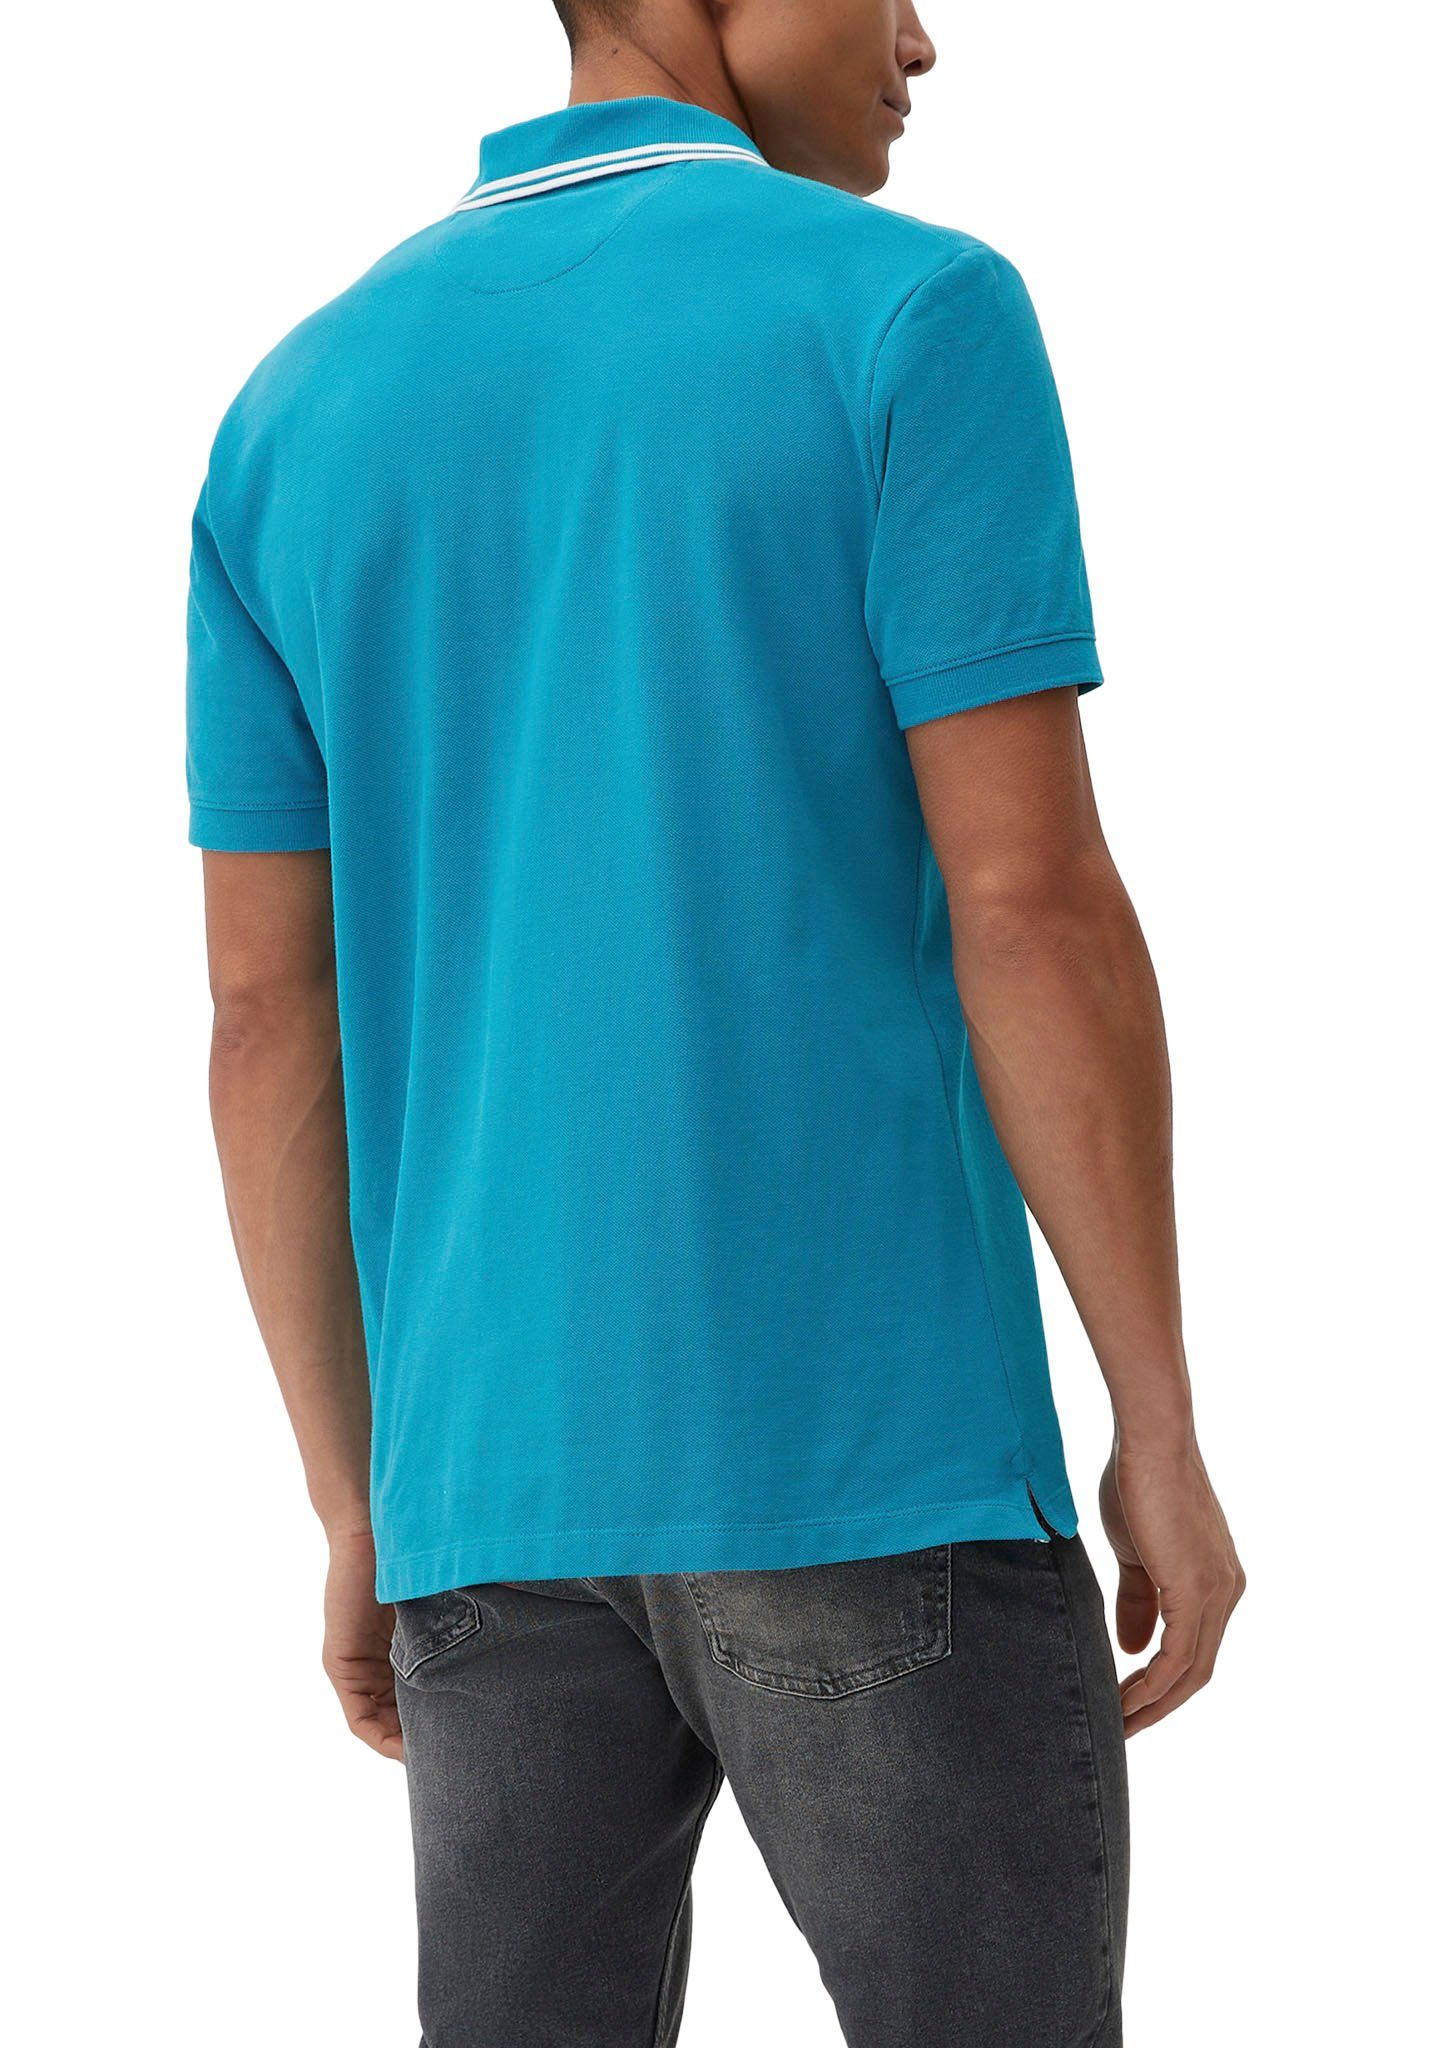 Poloshirt s.Oliver Labelpatch green mit blue